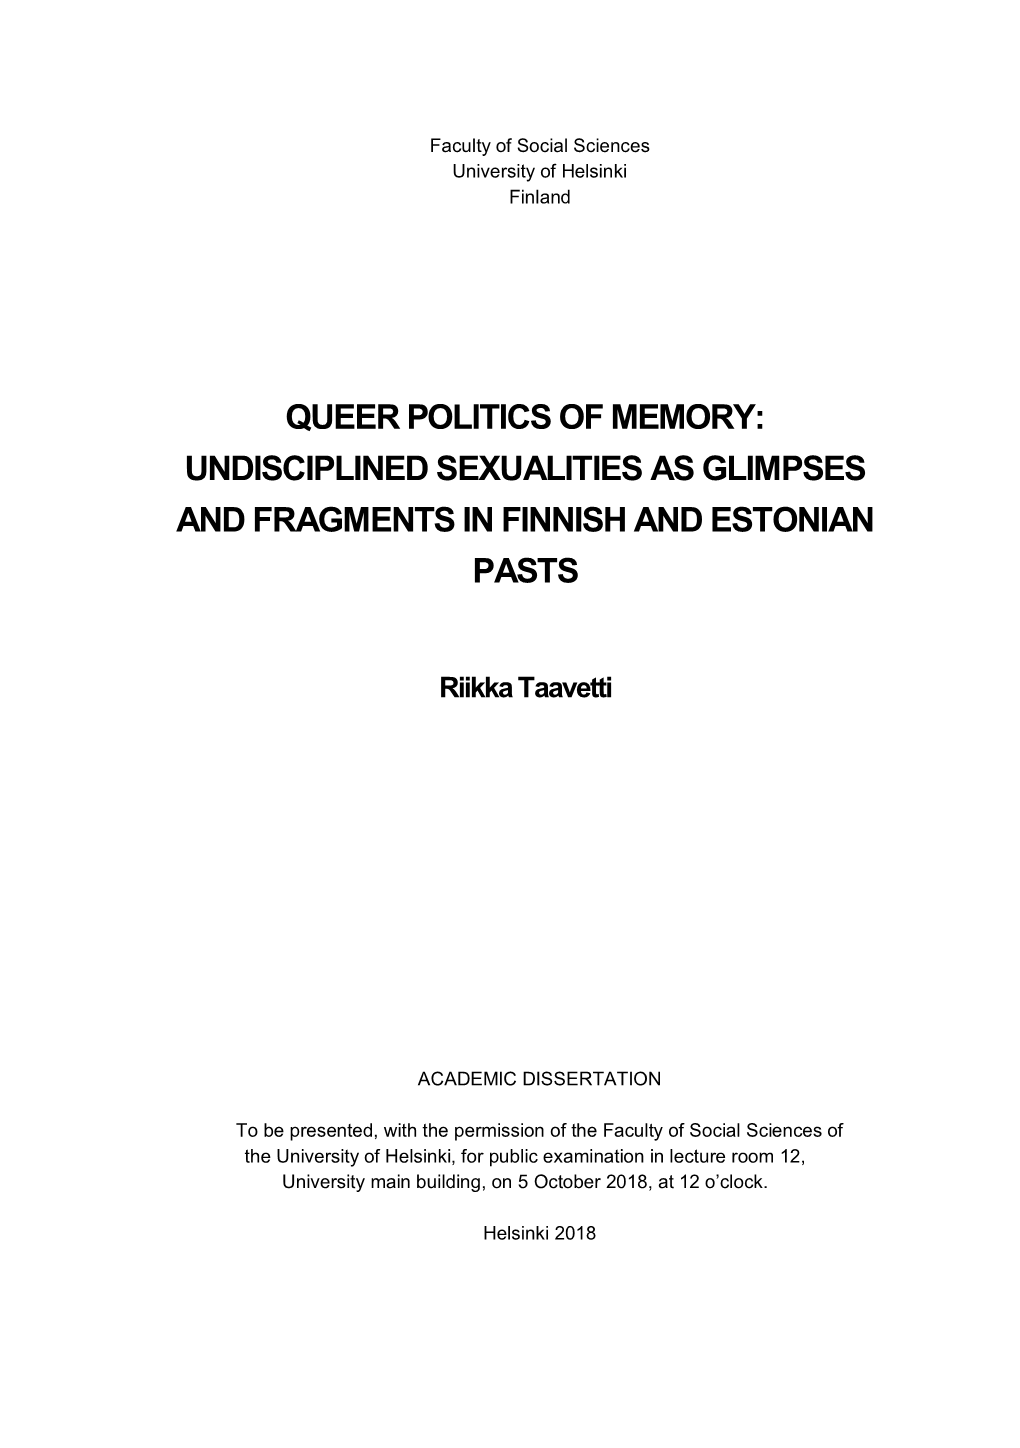 Queer Politics of Memory: Undisciplined Sexualities As Glimpses and Fragments in Finnish and Estonian Pasts